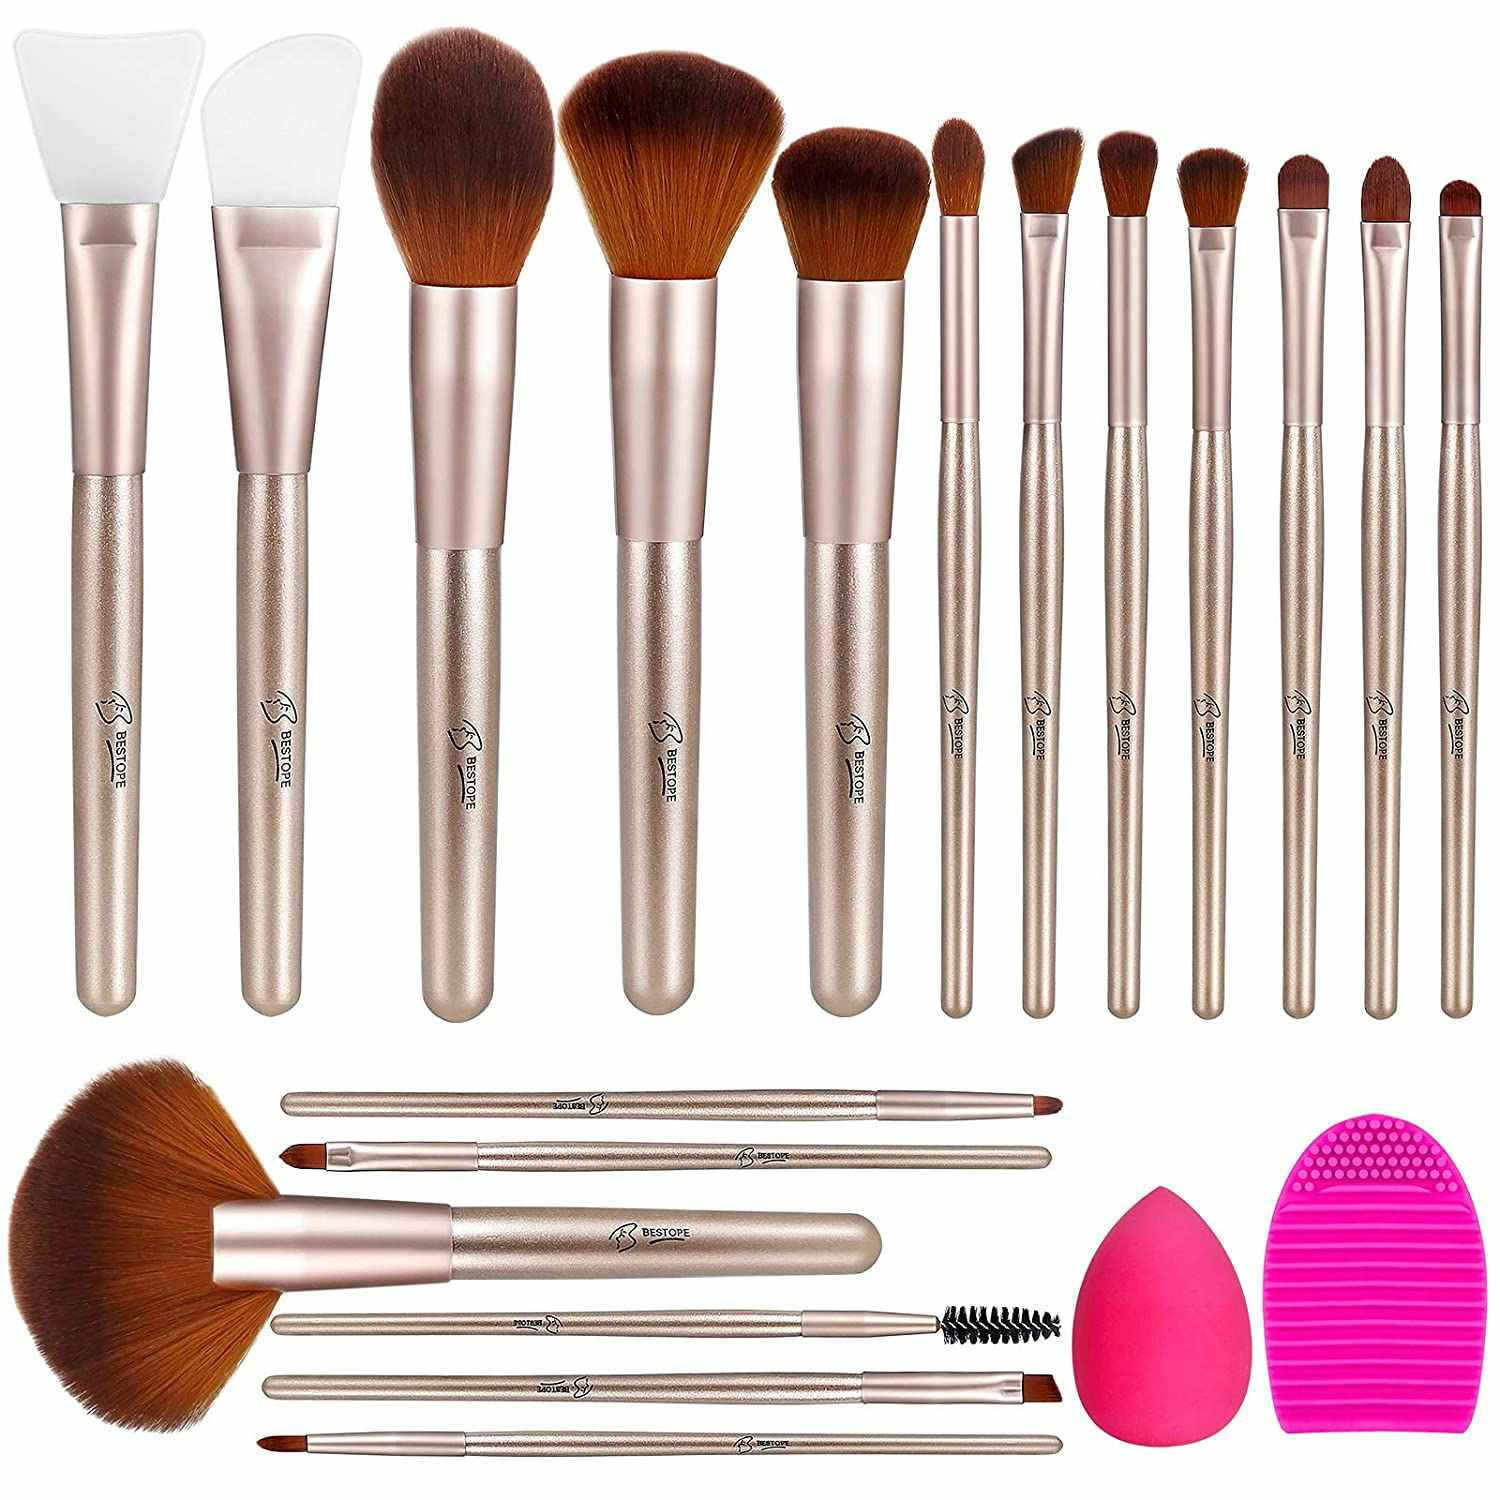 A set of makeup brushes and accessories on a white background.